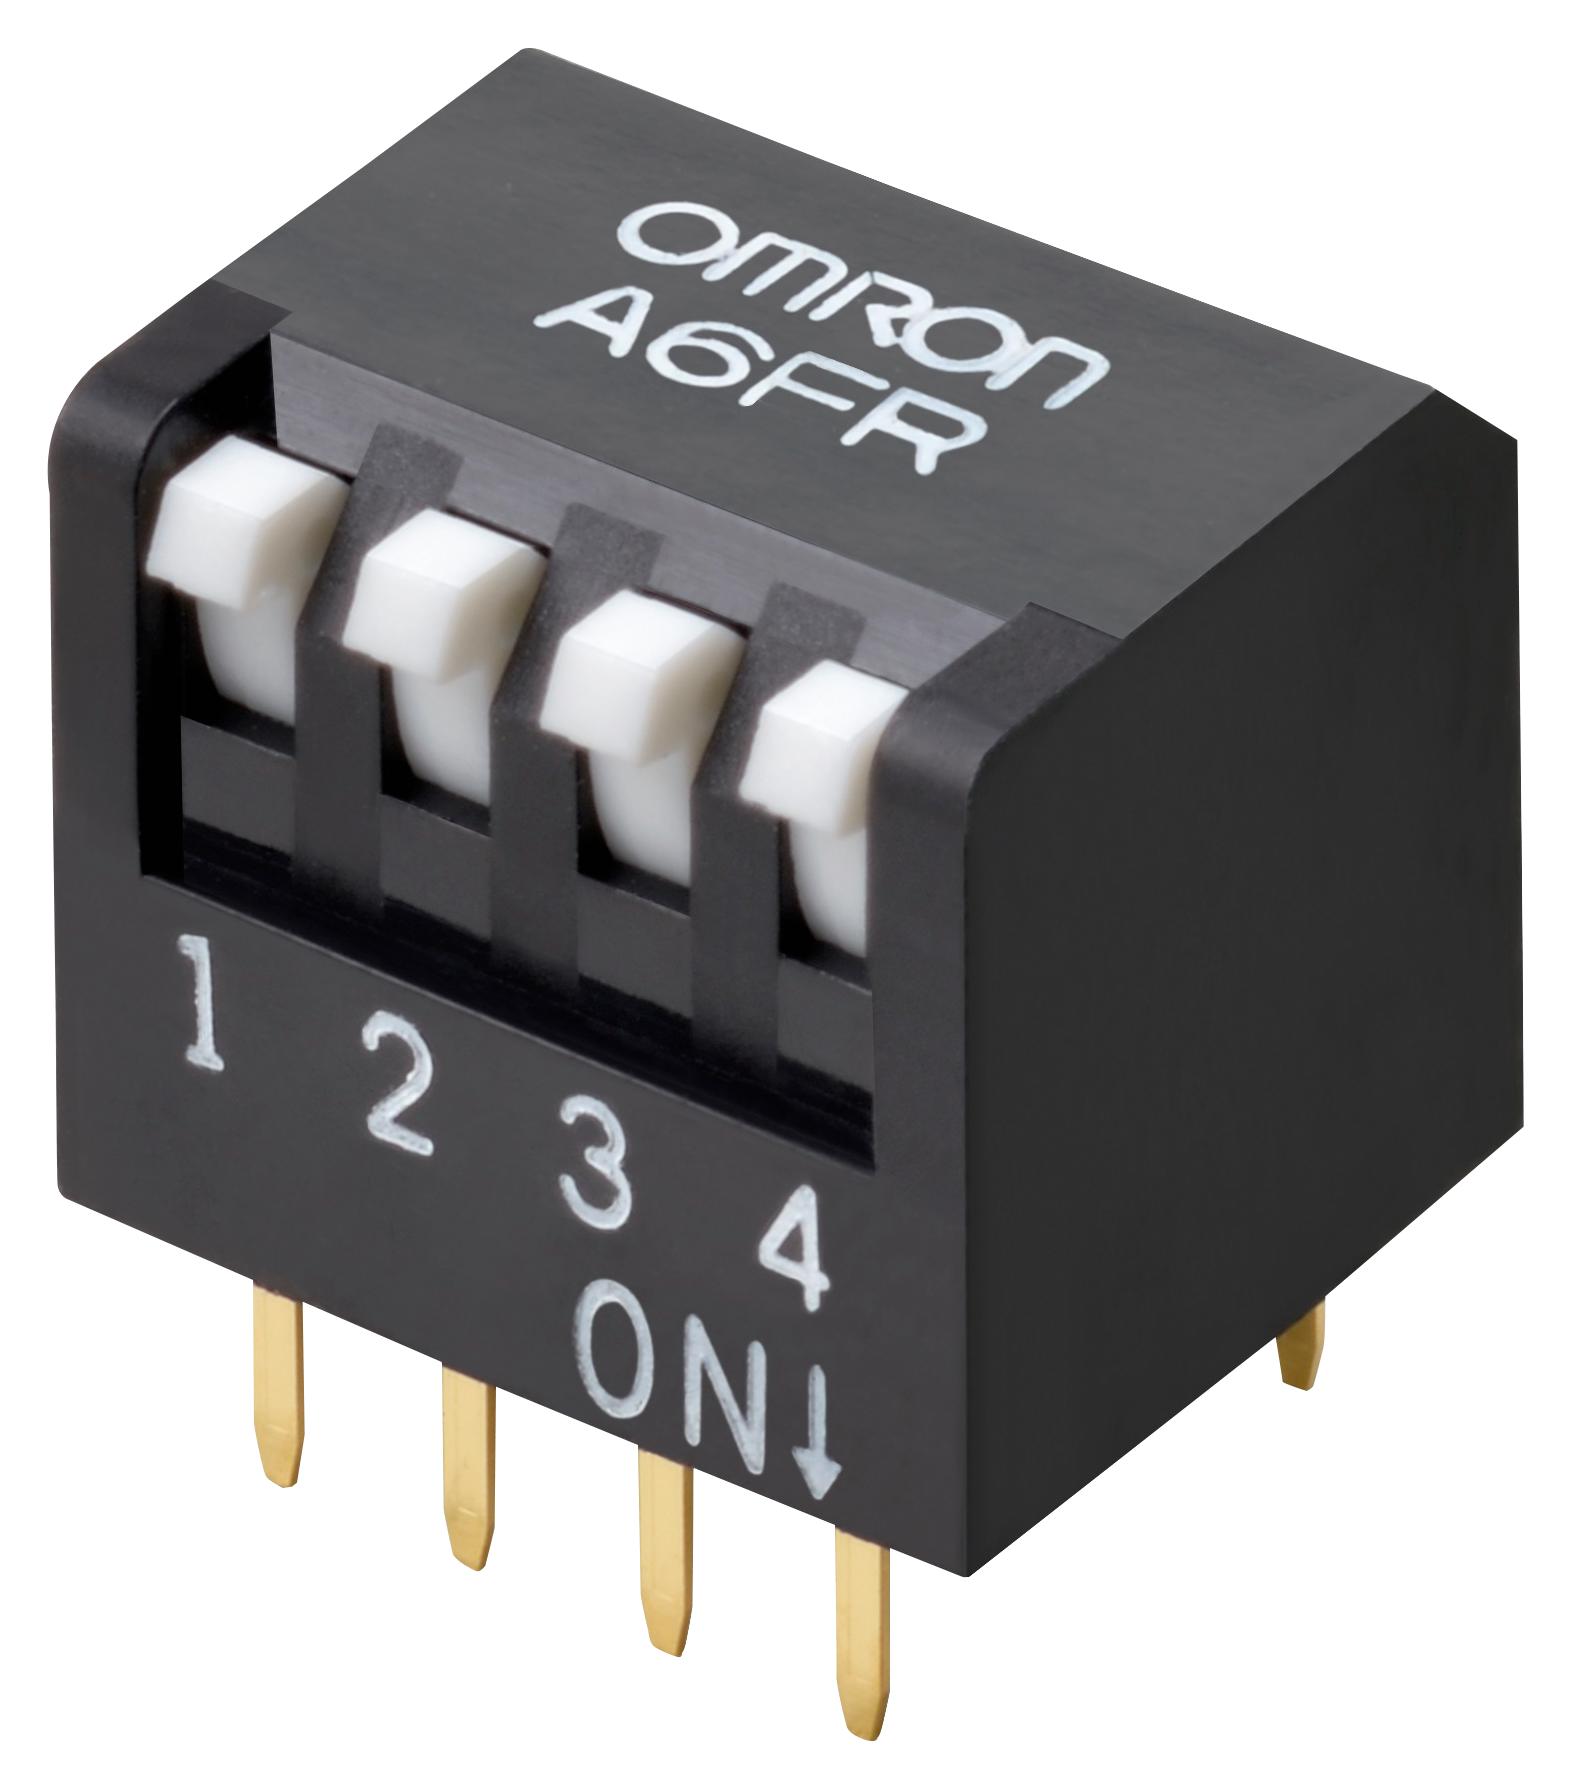 A6FR-4101 DIP SWITCH, 4POS, SPST, PIANO KEY, TH OMRON